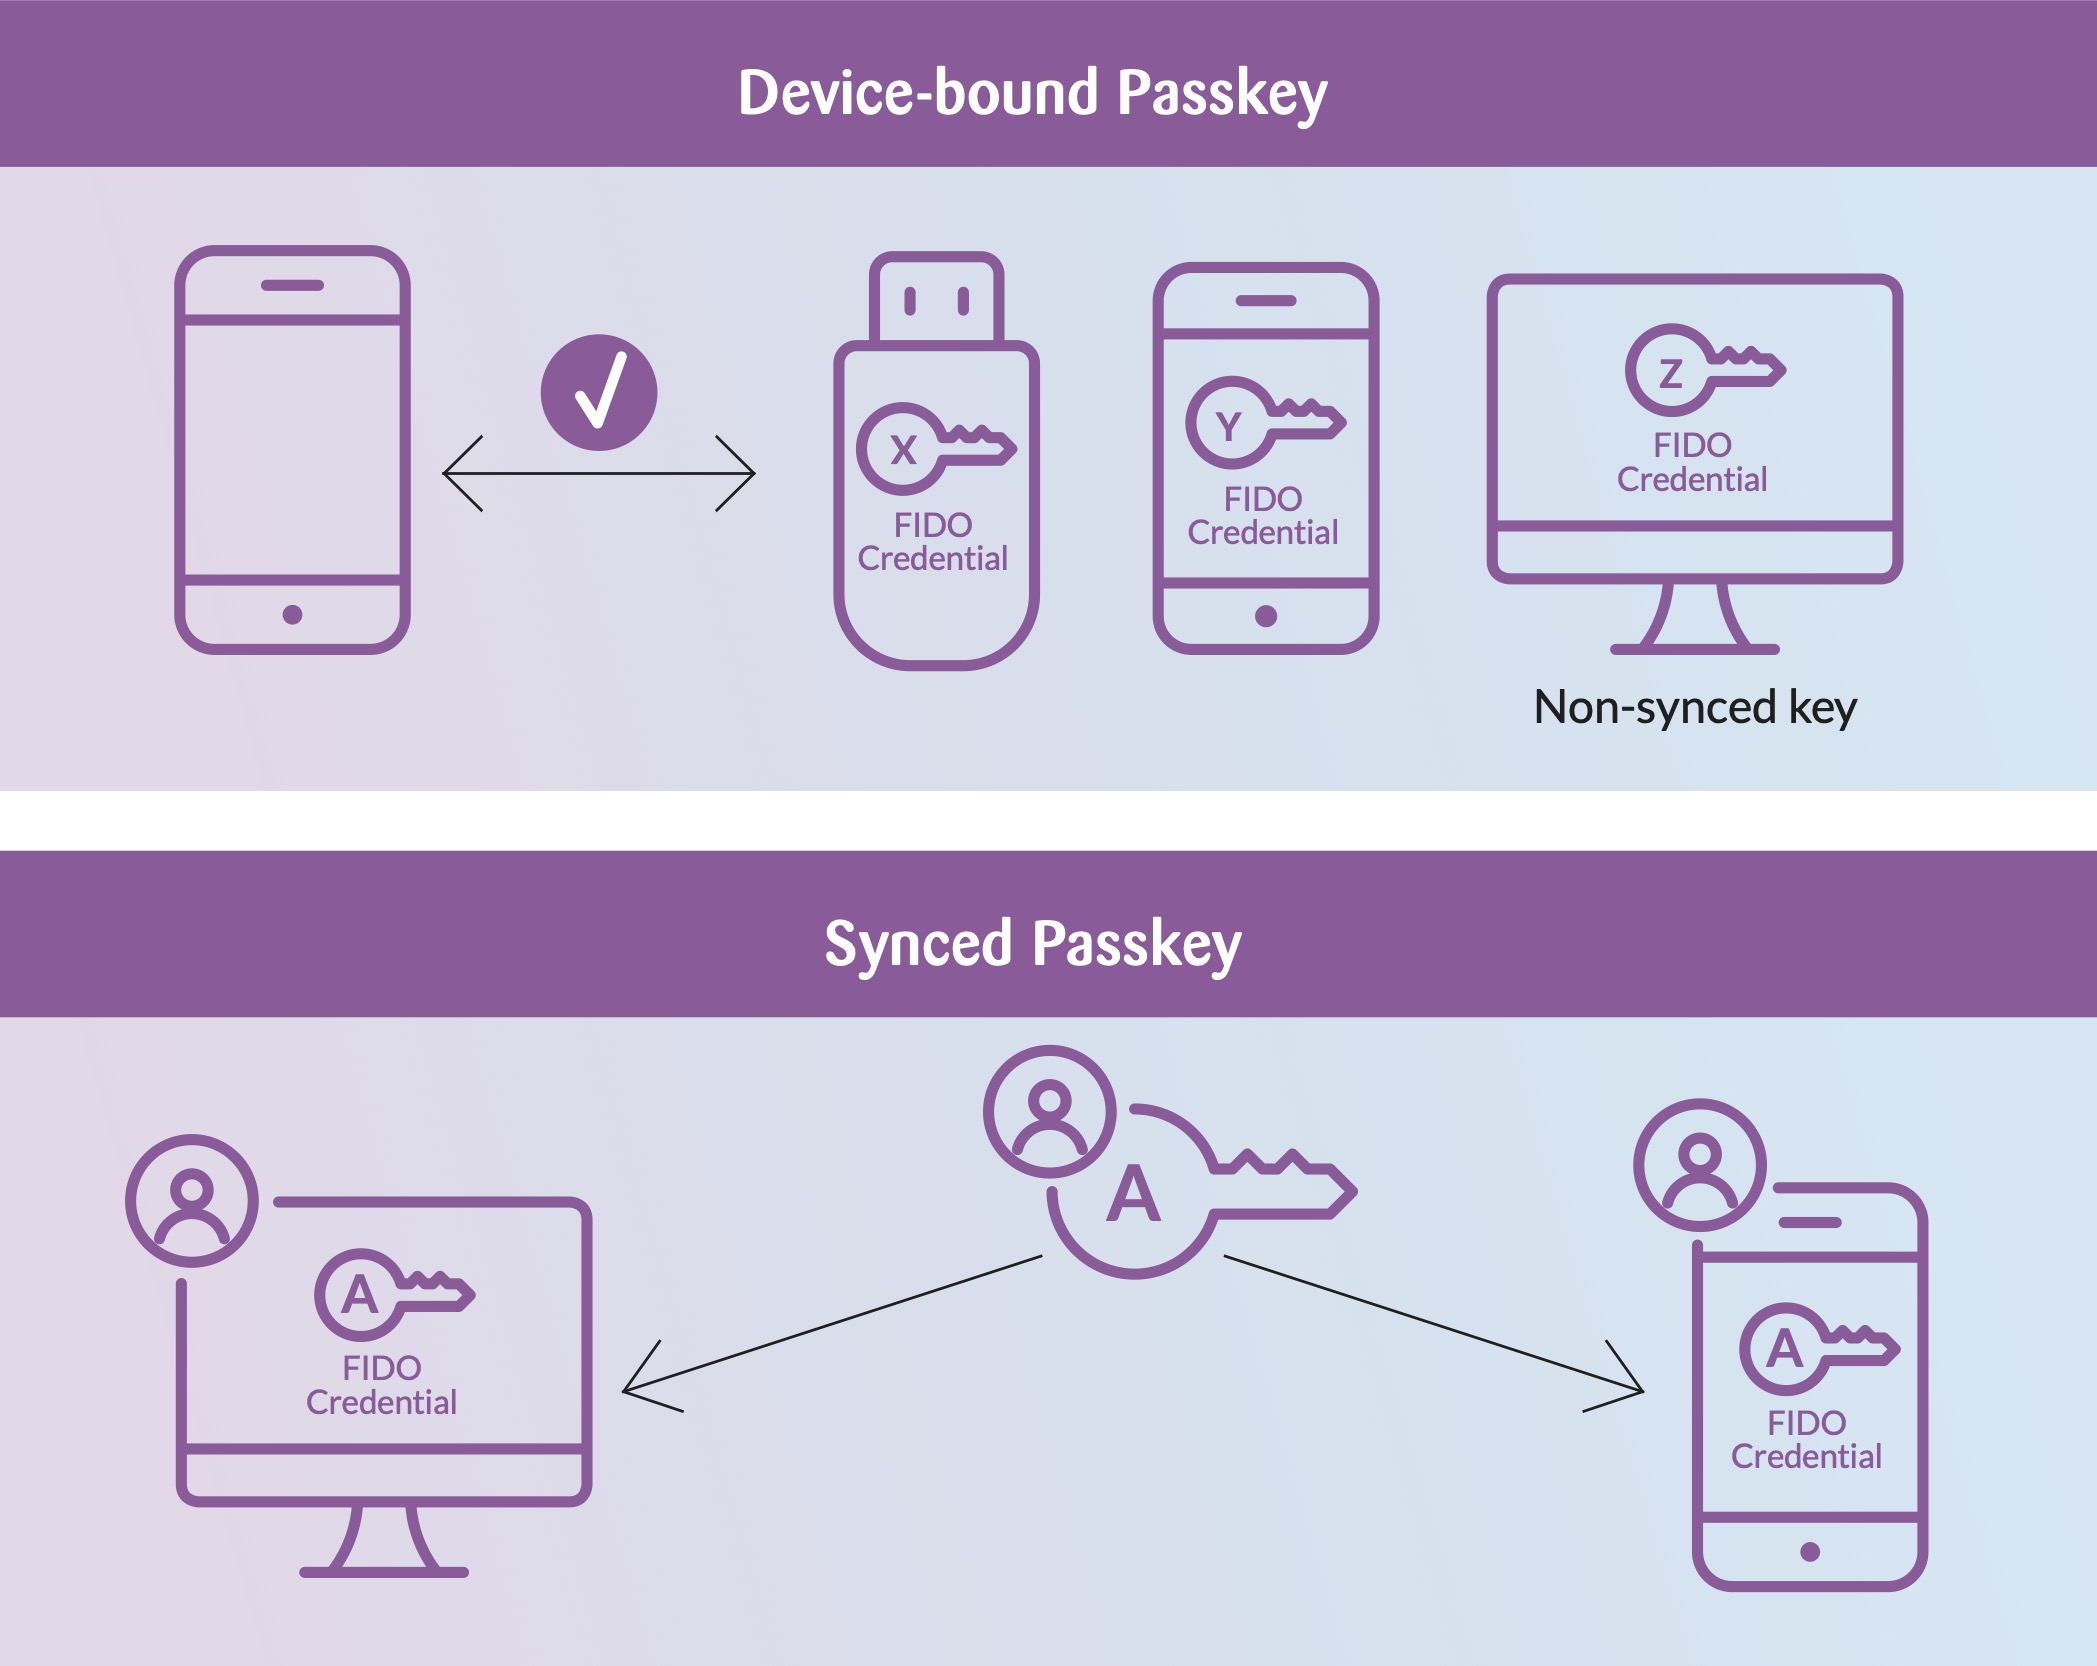 Diagram illustrating the difference between device-bound passkeys and synced passkeys